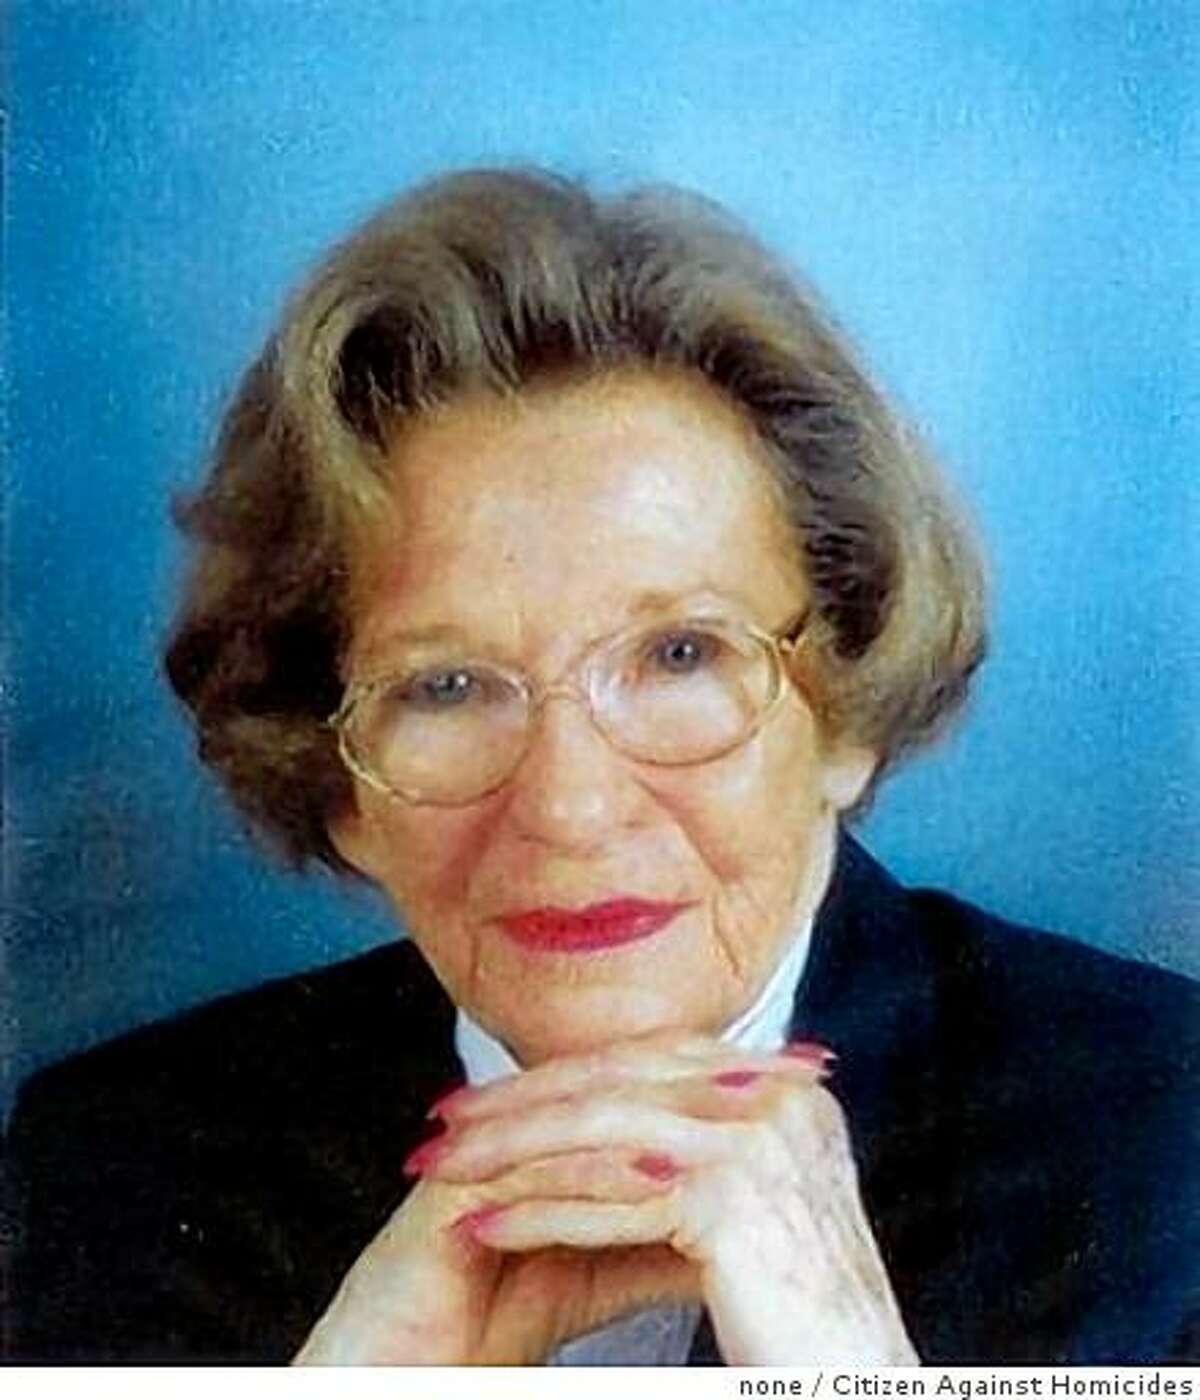 obit photo of Jane Alexander, a longtime Marin County resident whose murder-solving crusade became the subject of a book, magazine articles and TV shows, has died. Mrs. Alexander died Dec. 14 of kidney cancer at a convalescent hospital in Greenbrae, friends said. She was 86. With a life story that reads like a detective novel, Mrs. Alexander overcame dark and shadowy figures and experienced financial setbacks and personal tragedy, but also had her share of poignant moments and satisfying victories. It was not until she turned 60 that she forged the identity for which she is most remembered. As a 1994 co-founder of a non-profit organization called Citizens Against Homicide, she helped solve crimes, opposed paroling convicted murderers and lobbied police departments to stay on top of stalled murder cases.